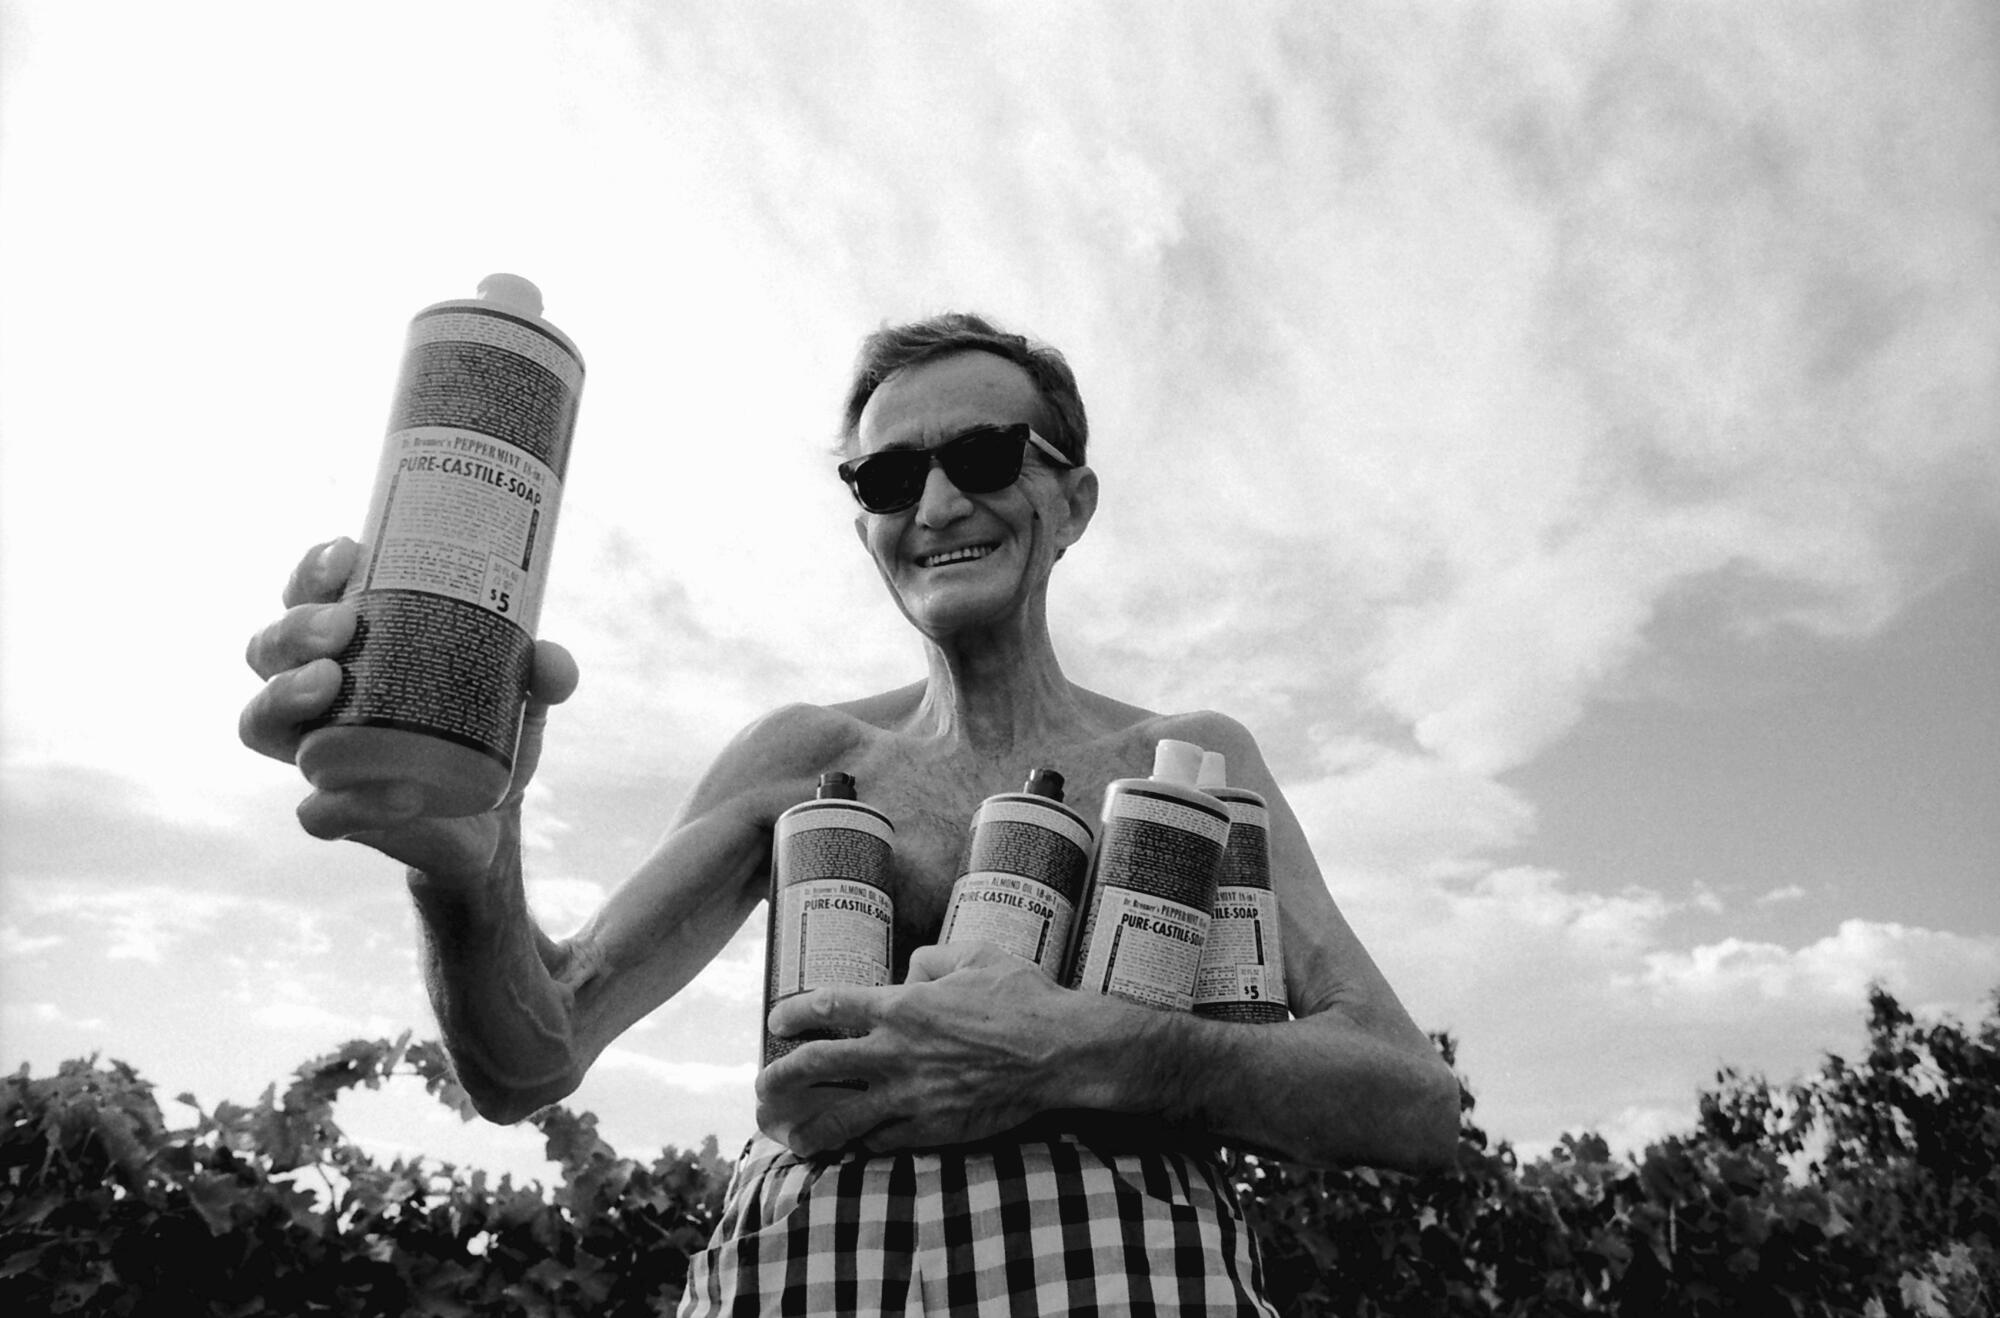 Dr. Bronner's Magic Soaps: He was a giant